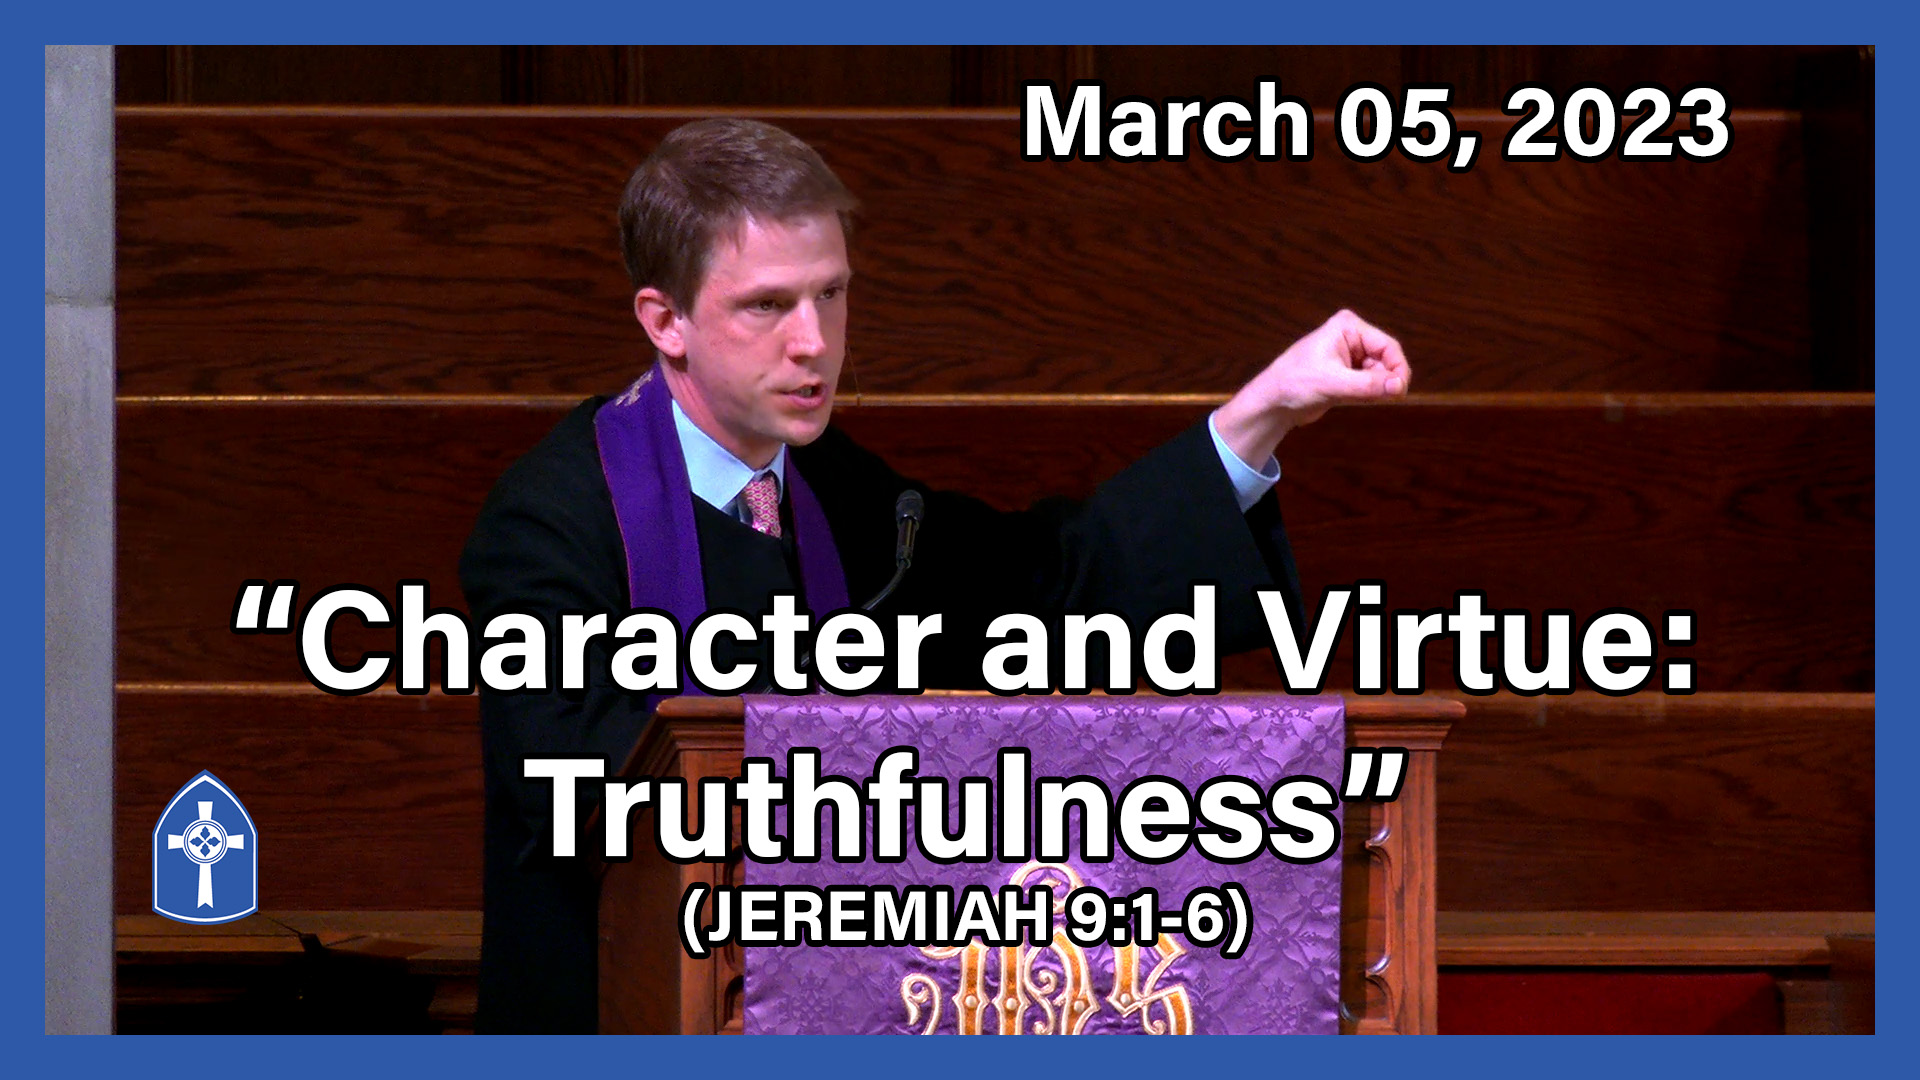 March 05 - Character and Virtue: Truthfulness